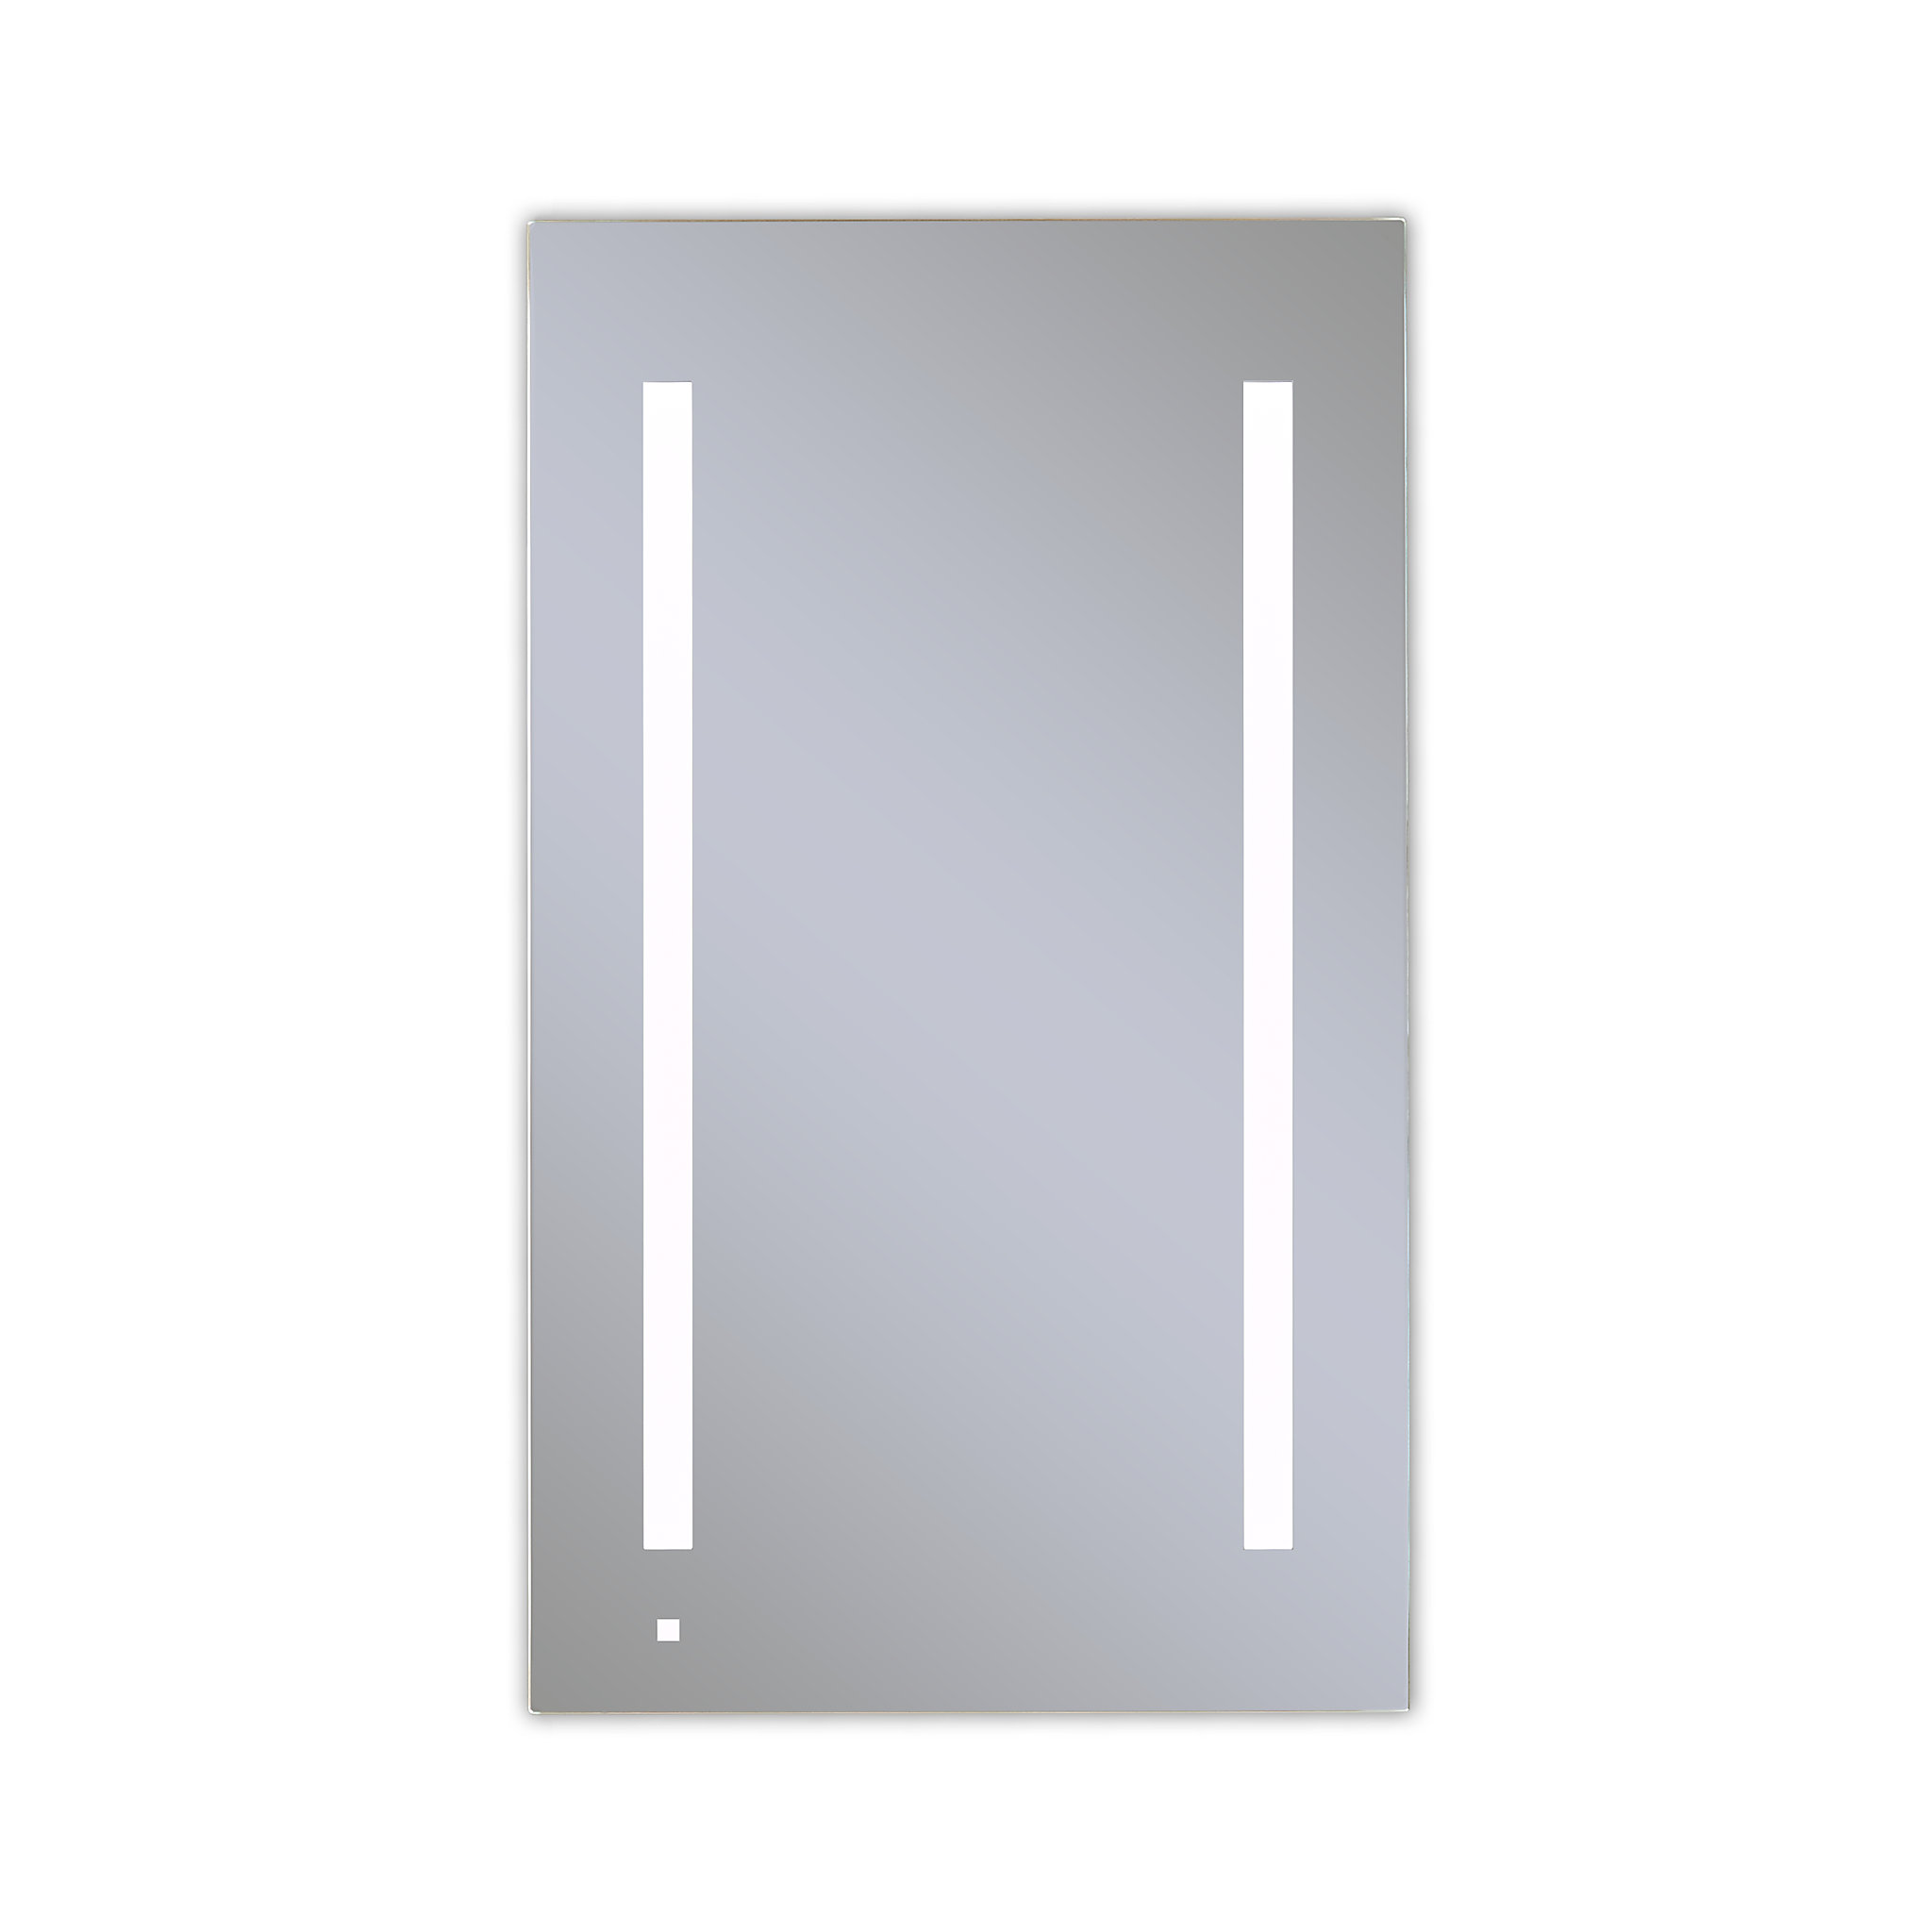 Robern AC2440D4P1RA AiO Lighted Cabinet, 24" x 40" x 4", LUM Lighting, 4000K Temperature (Cool Light), Dimmable, OM Audio, Elect